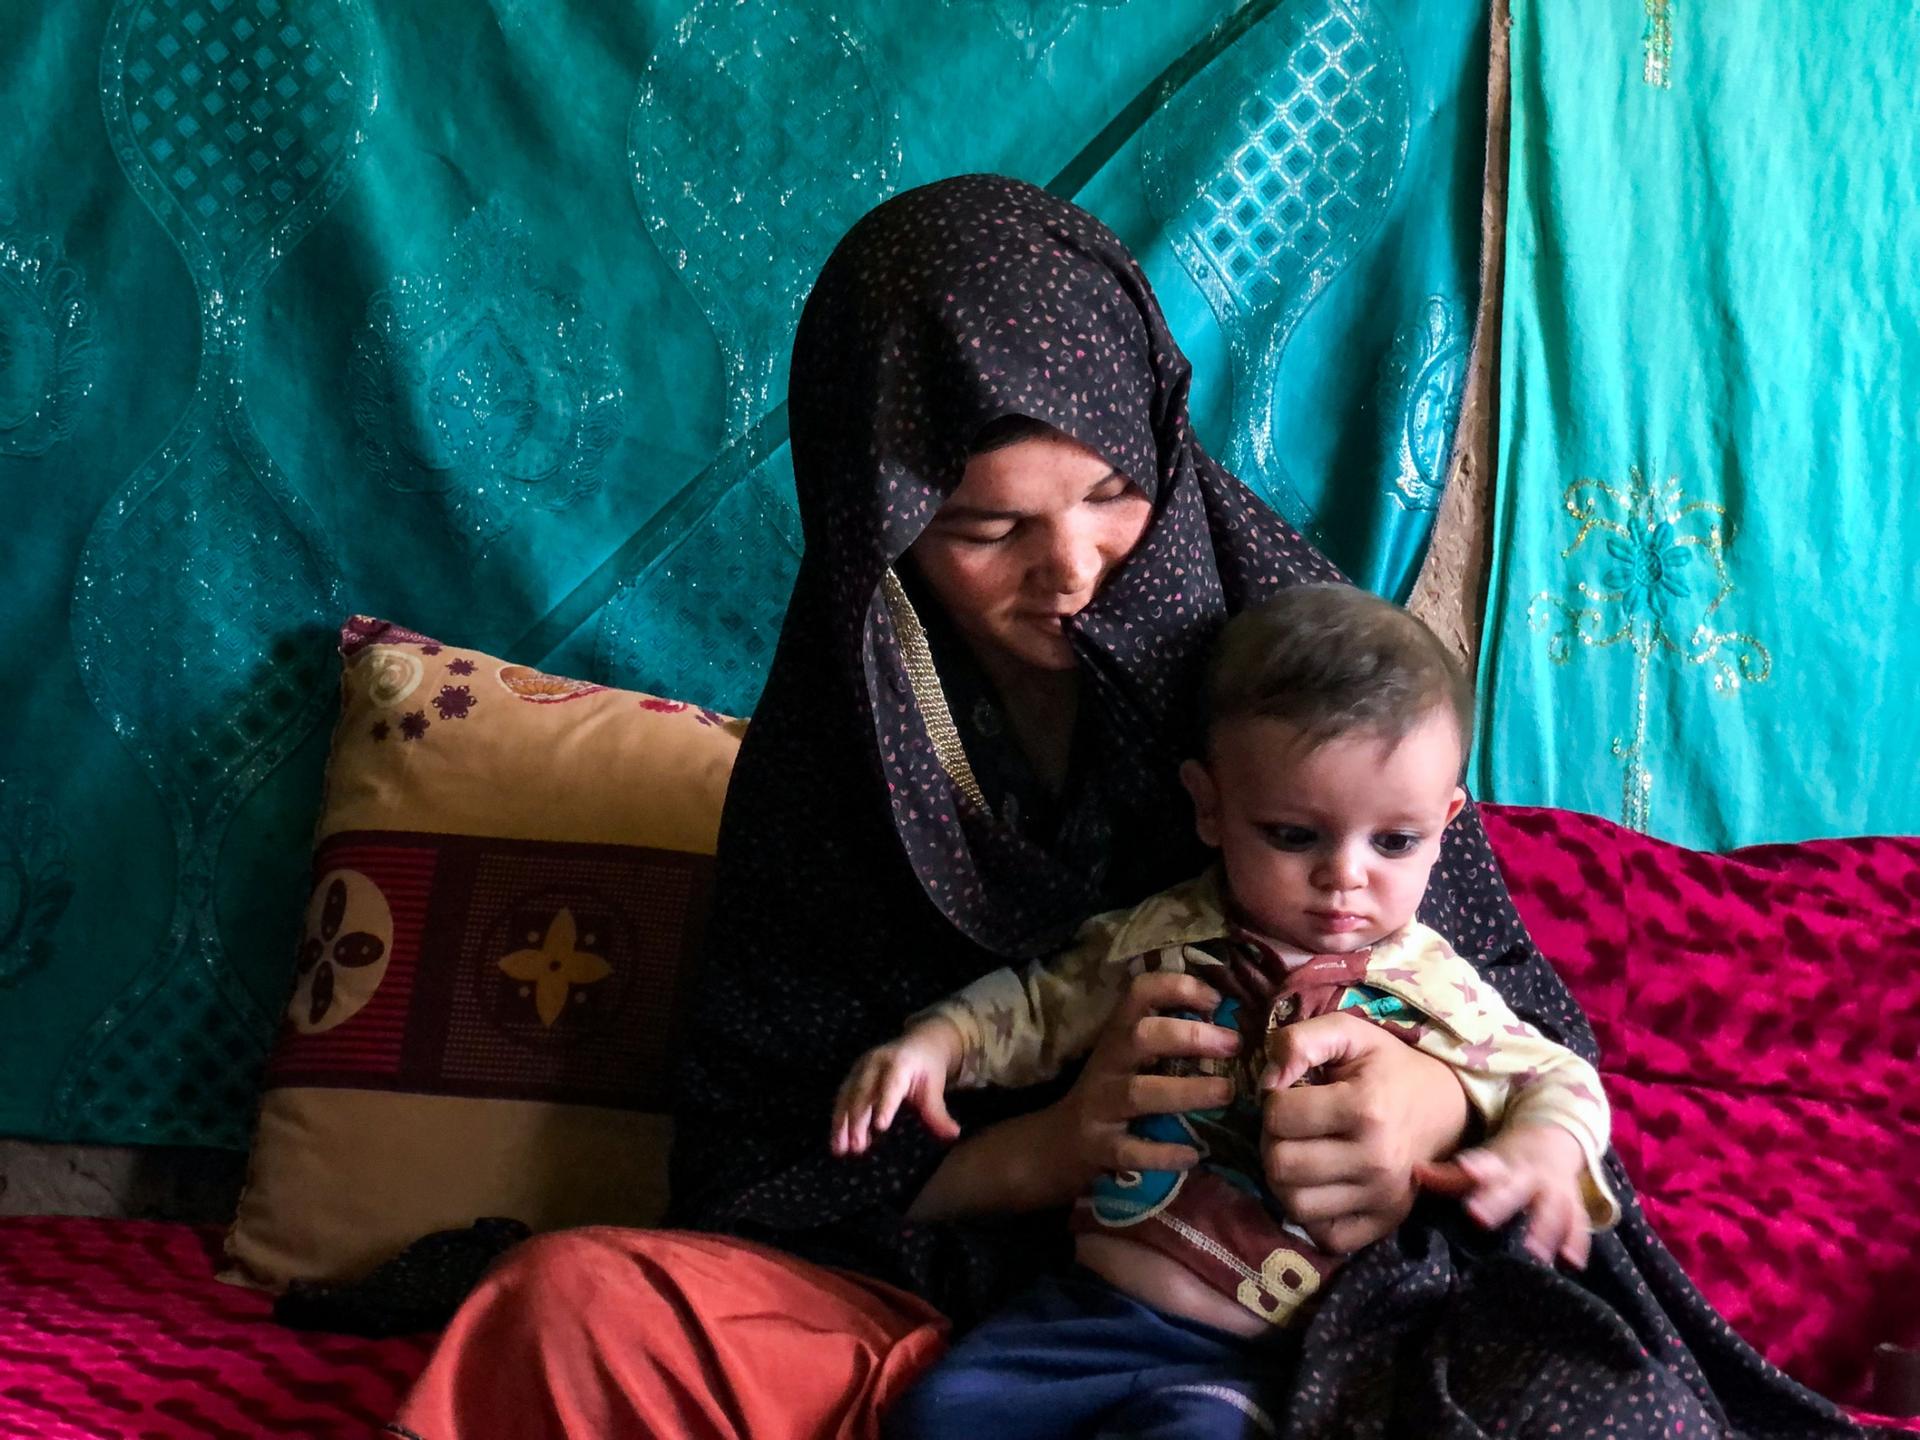 Negineh and her 7-month-old son Ibrahim fled their home in Badghis in northwestern Afghanistan. Her husband works in Iran and hasn't seen their son since he was born. Now, Negineh and Ibrahim are in Herat, in relative safety but they both face hunger.